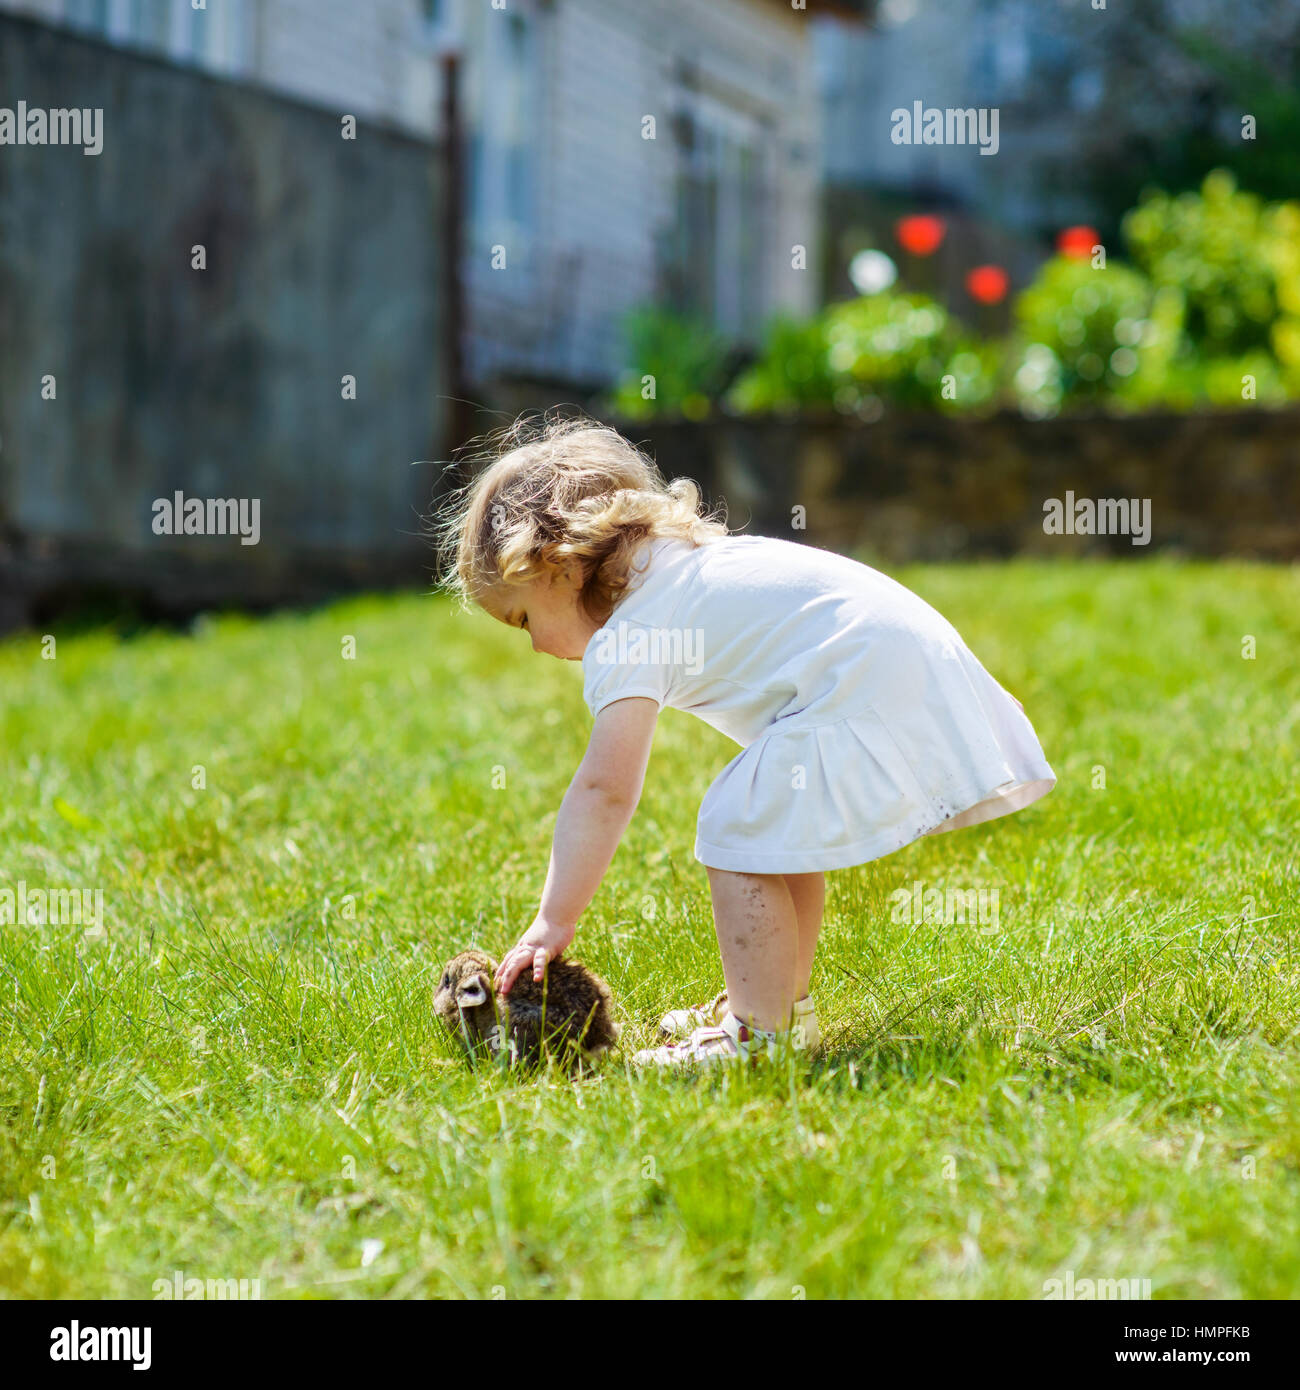 child with a rabbit Stock Photo